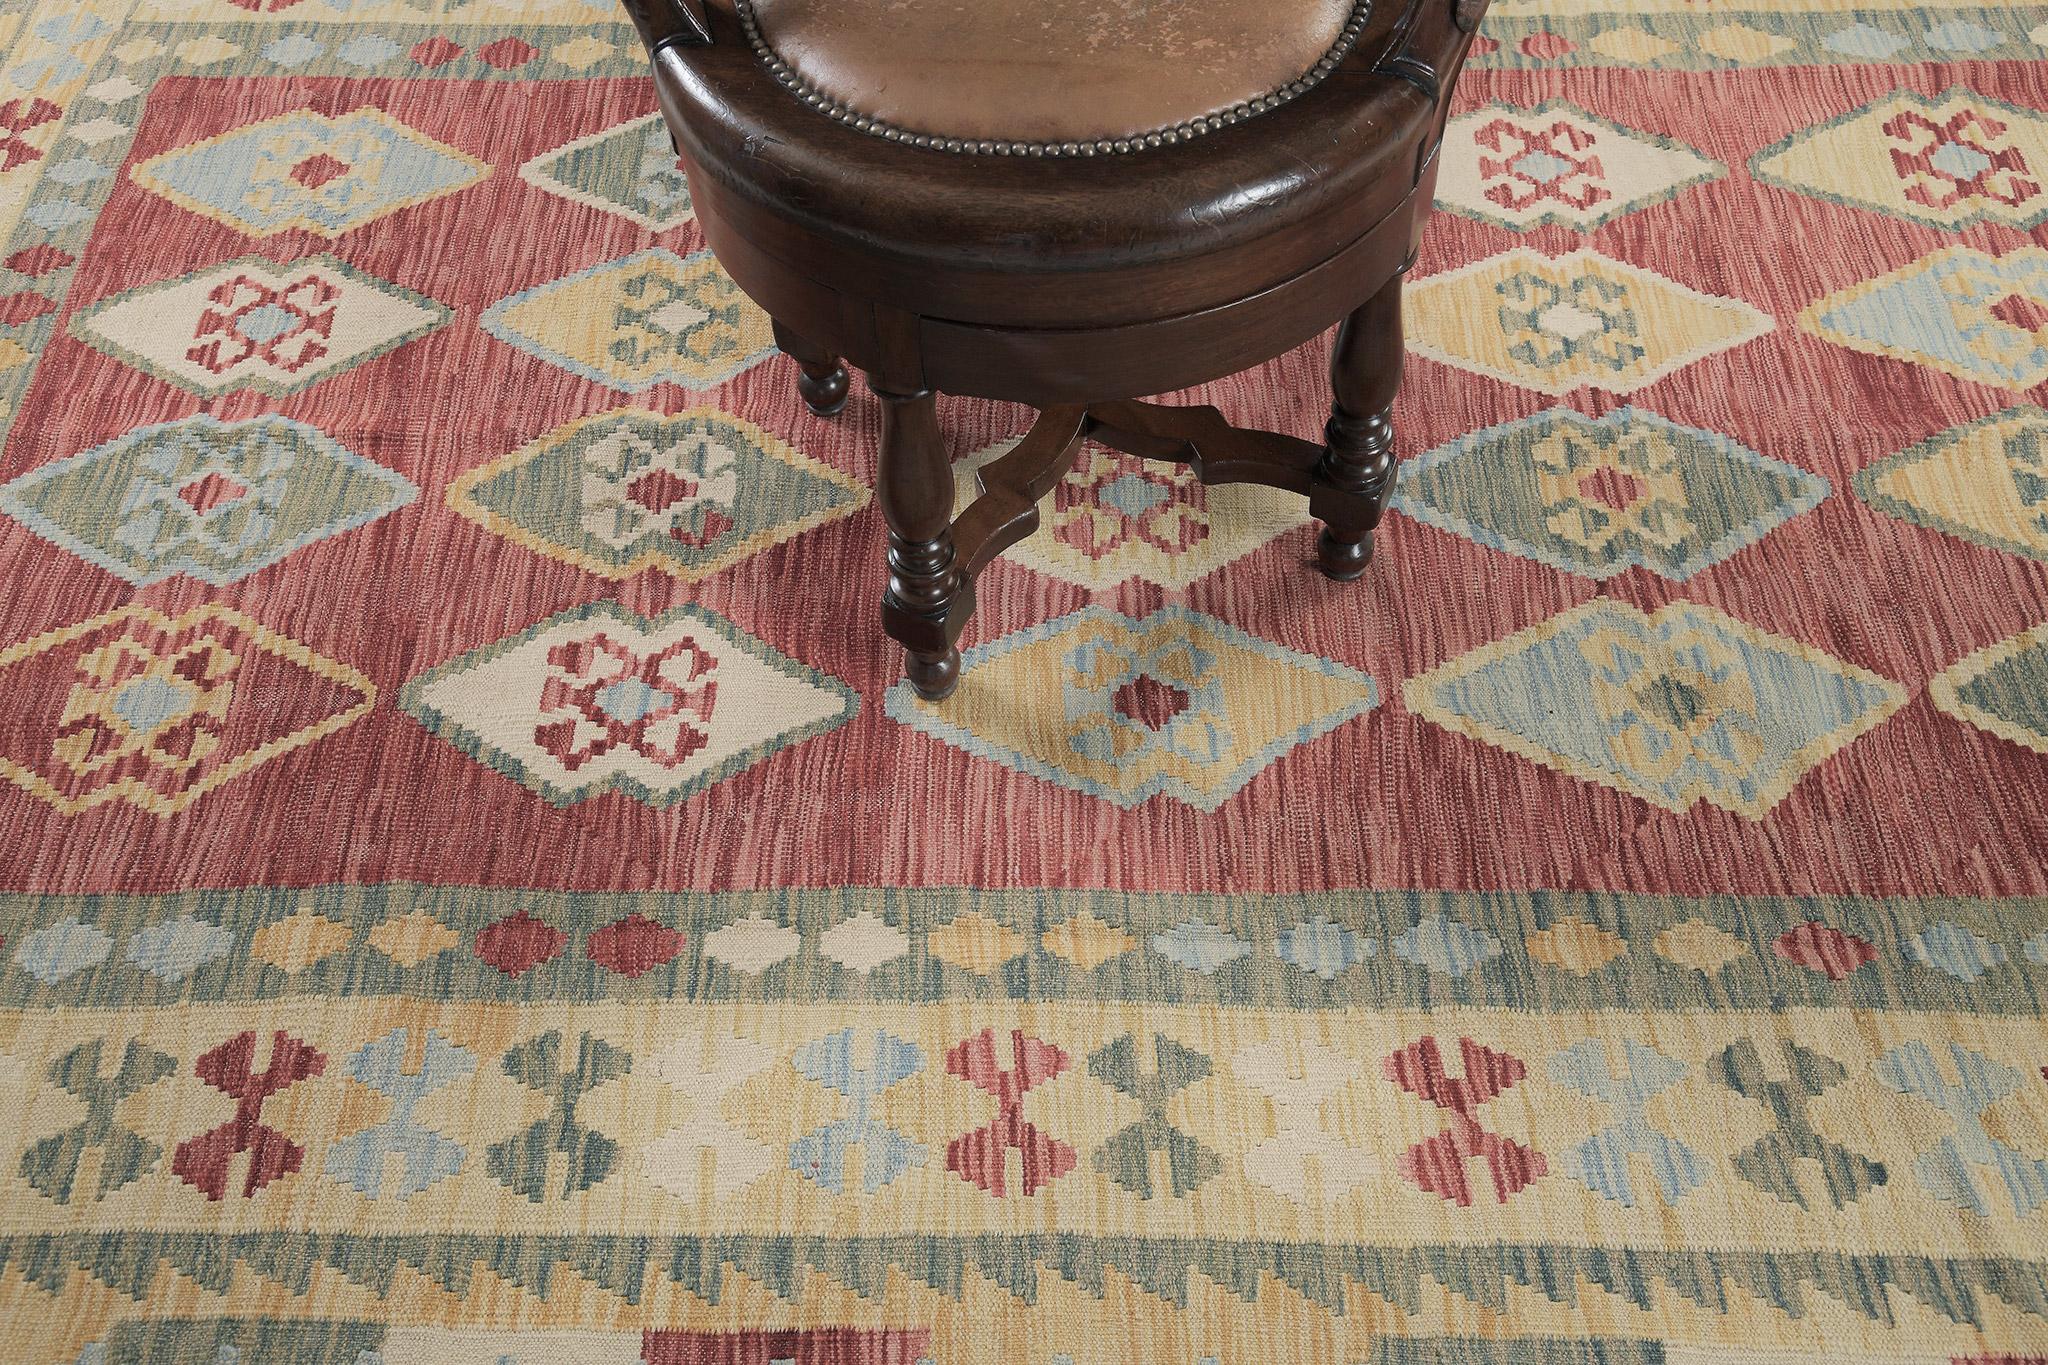 Five layers of borders are accentuated in this gorgeous flatweave kilim. It features a delicate pattern that is interesting and manageable to decorate. Traditional interiors are most often used by designers.

Rug Number
24929
Size
6' 9